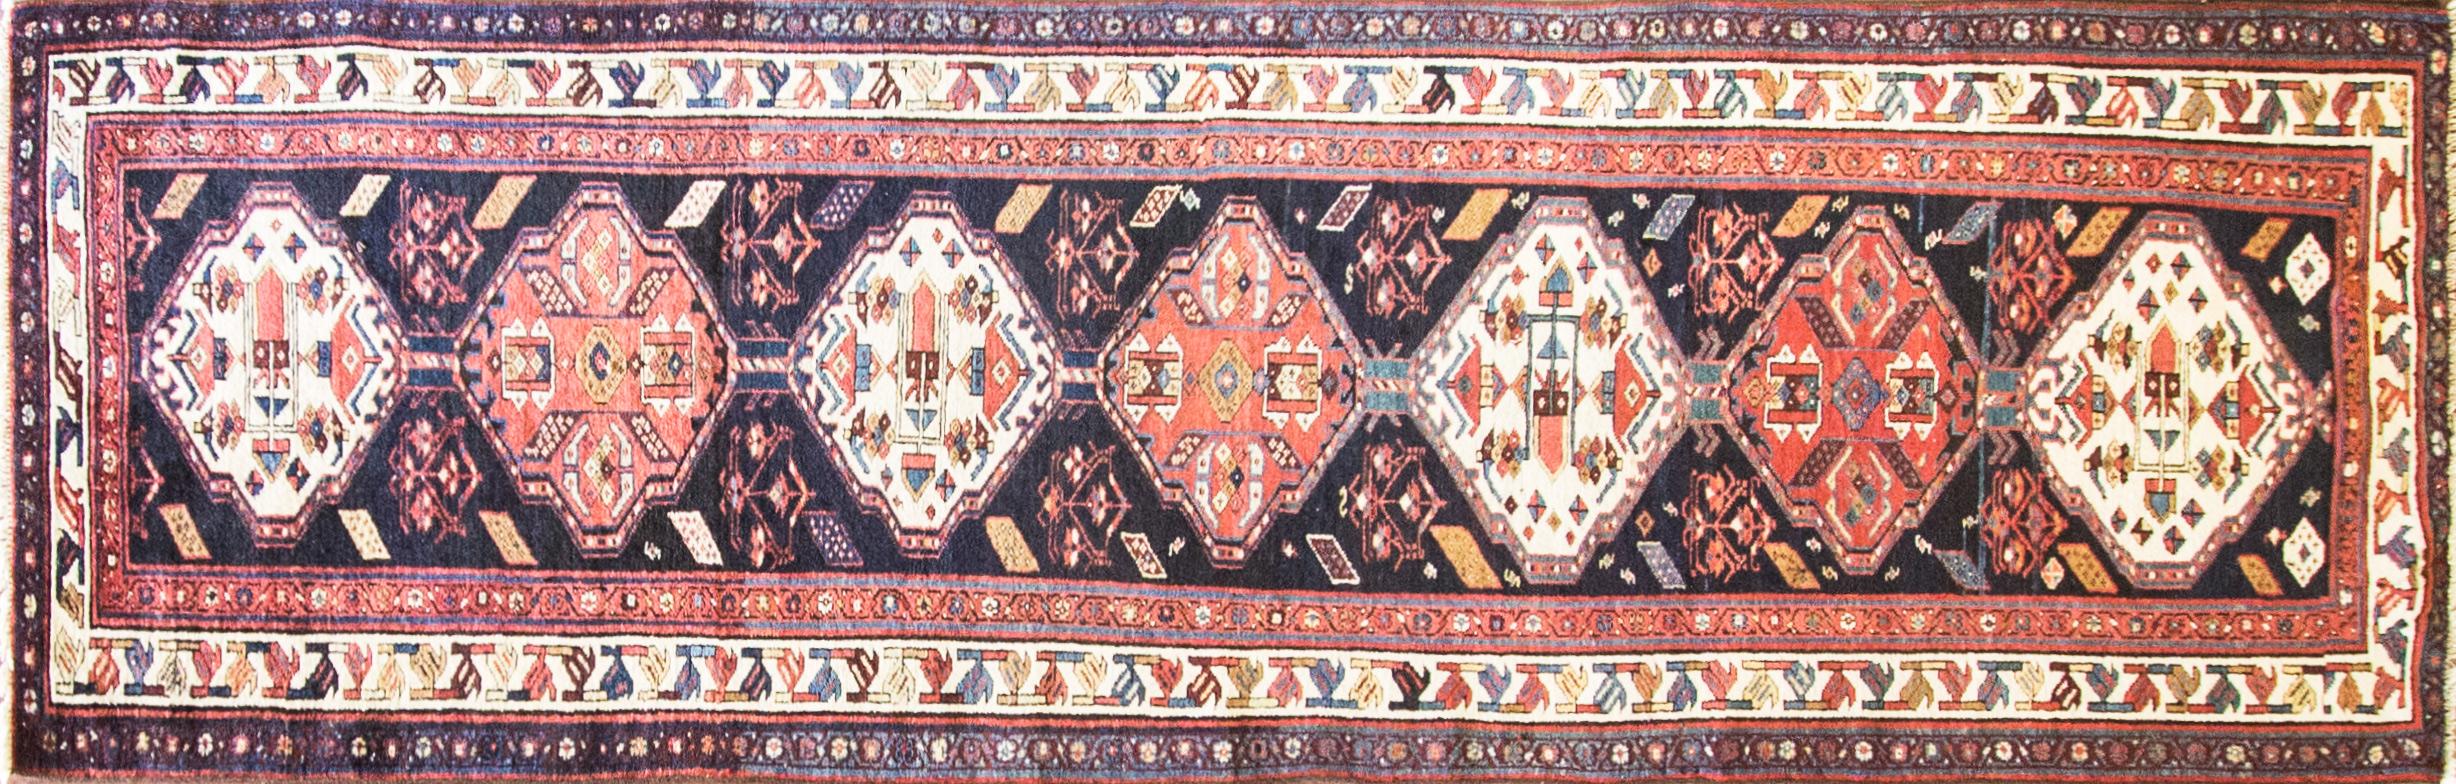 Fine antique Persian Bakhtiari rug, circa 1900 in excellent condition. 
Beautiful handmade Persian Bakhtiari rug like stain glass in good condition with naturals dye. The Bakhtiari tribe, based in Chahar Mahal and Bakhtiari, is well-known for their